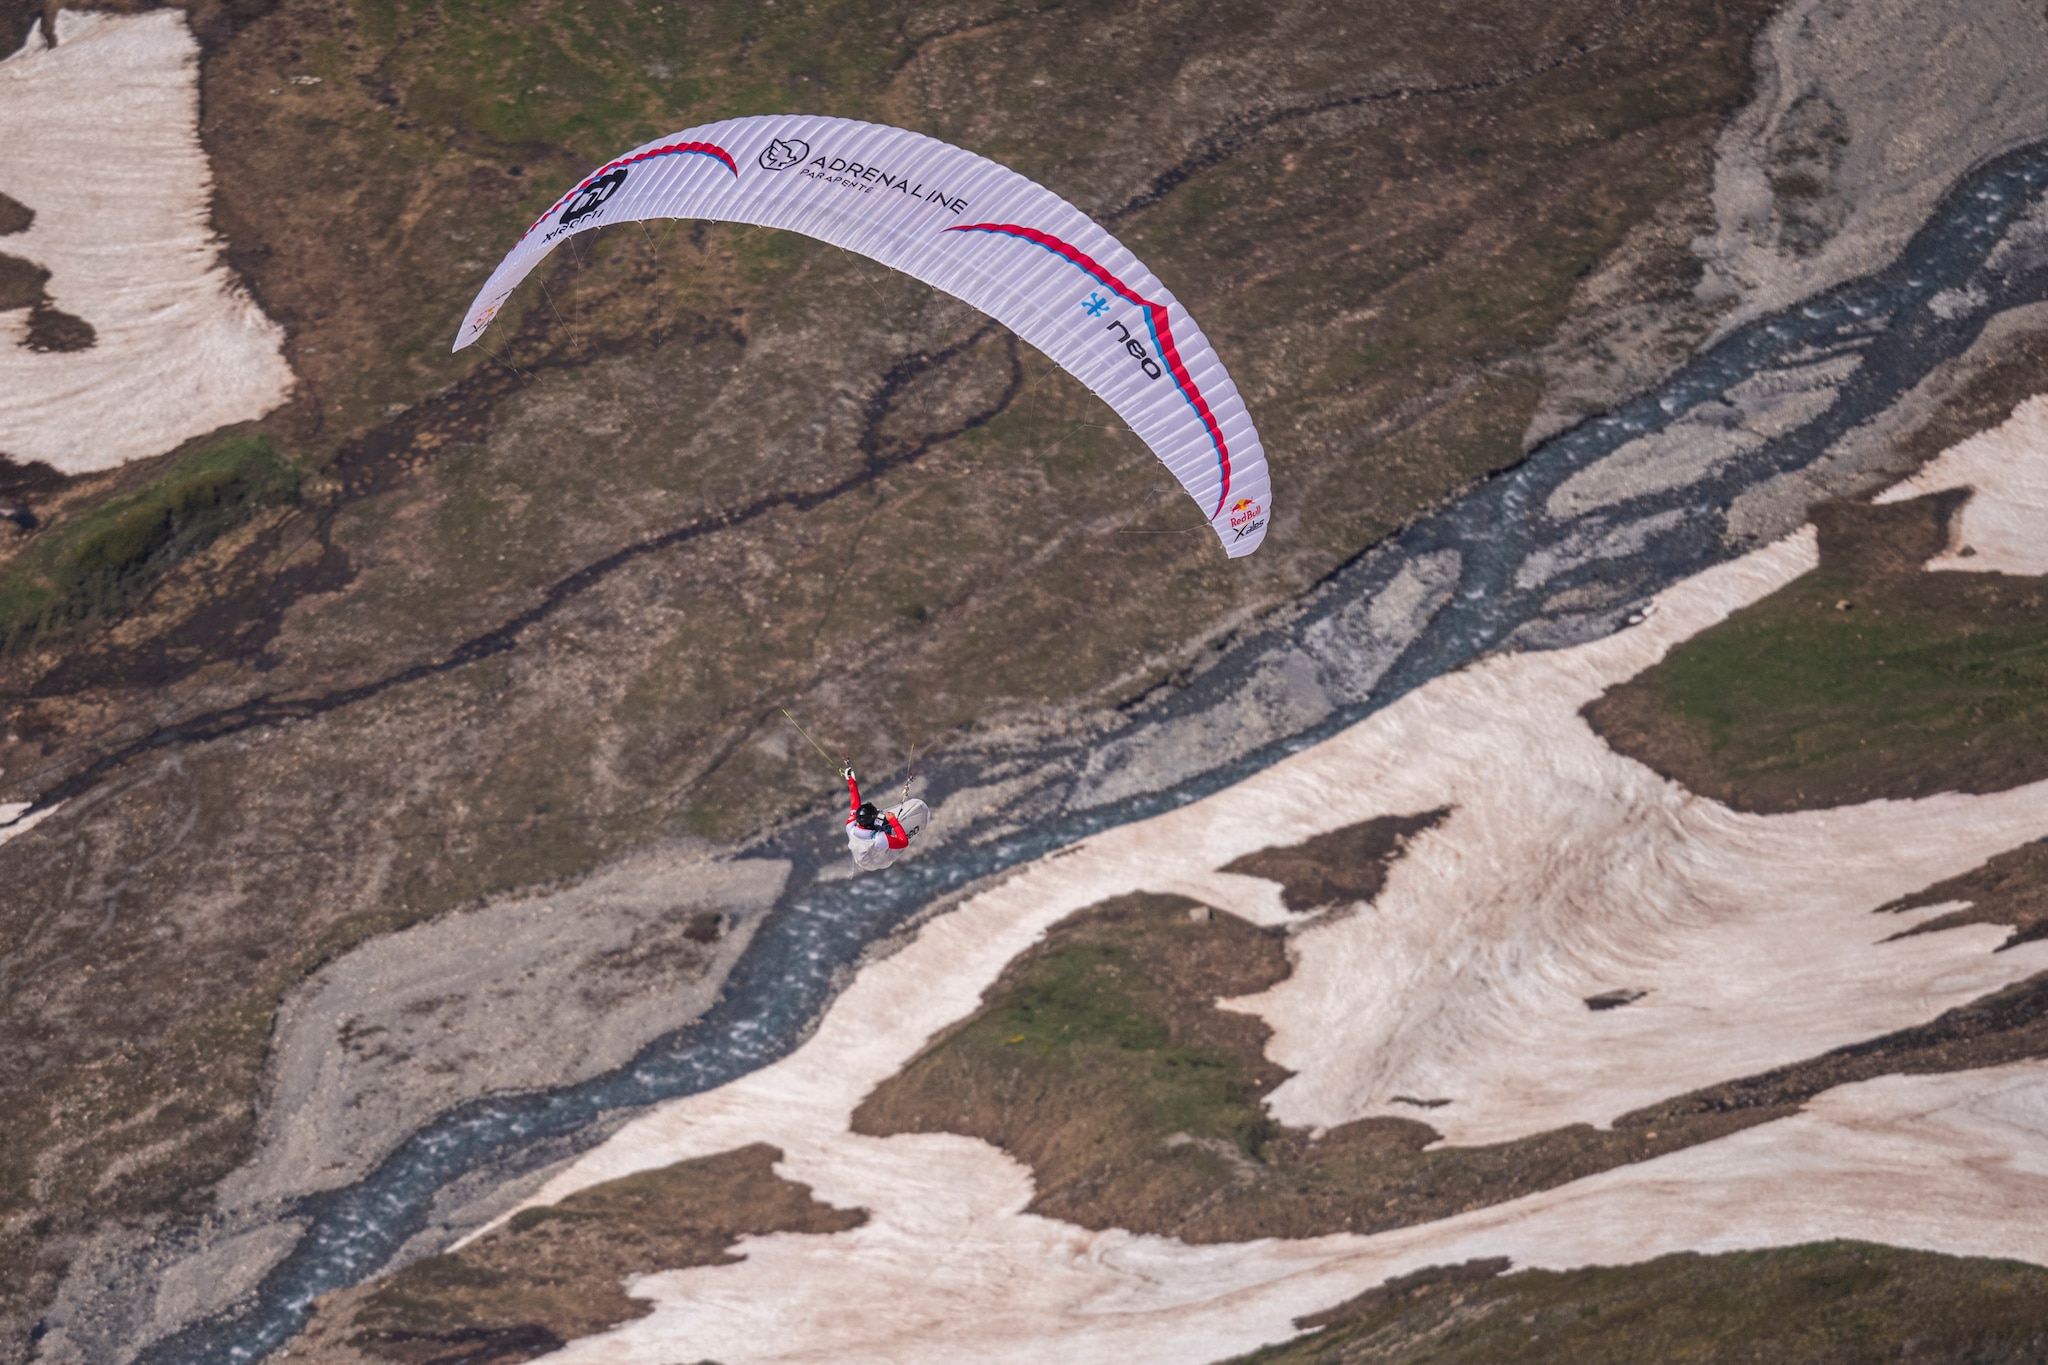 Maxime Pinot (FRA1) performing during the Red Bull X-Alps at the Mt Blanc / France on 26-June-2021. In this endurance adventure race athletes from 18 nations have to fly with paragliders or hike from Salzburg along the alps towards France, around the Mont Blanc back to Salzburg.